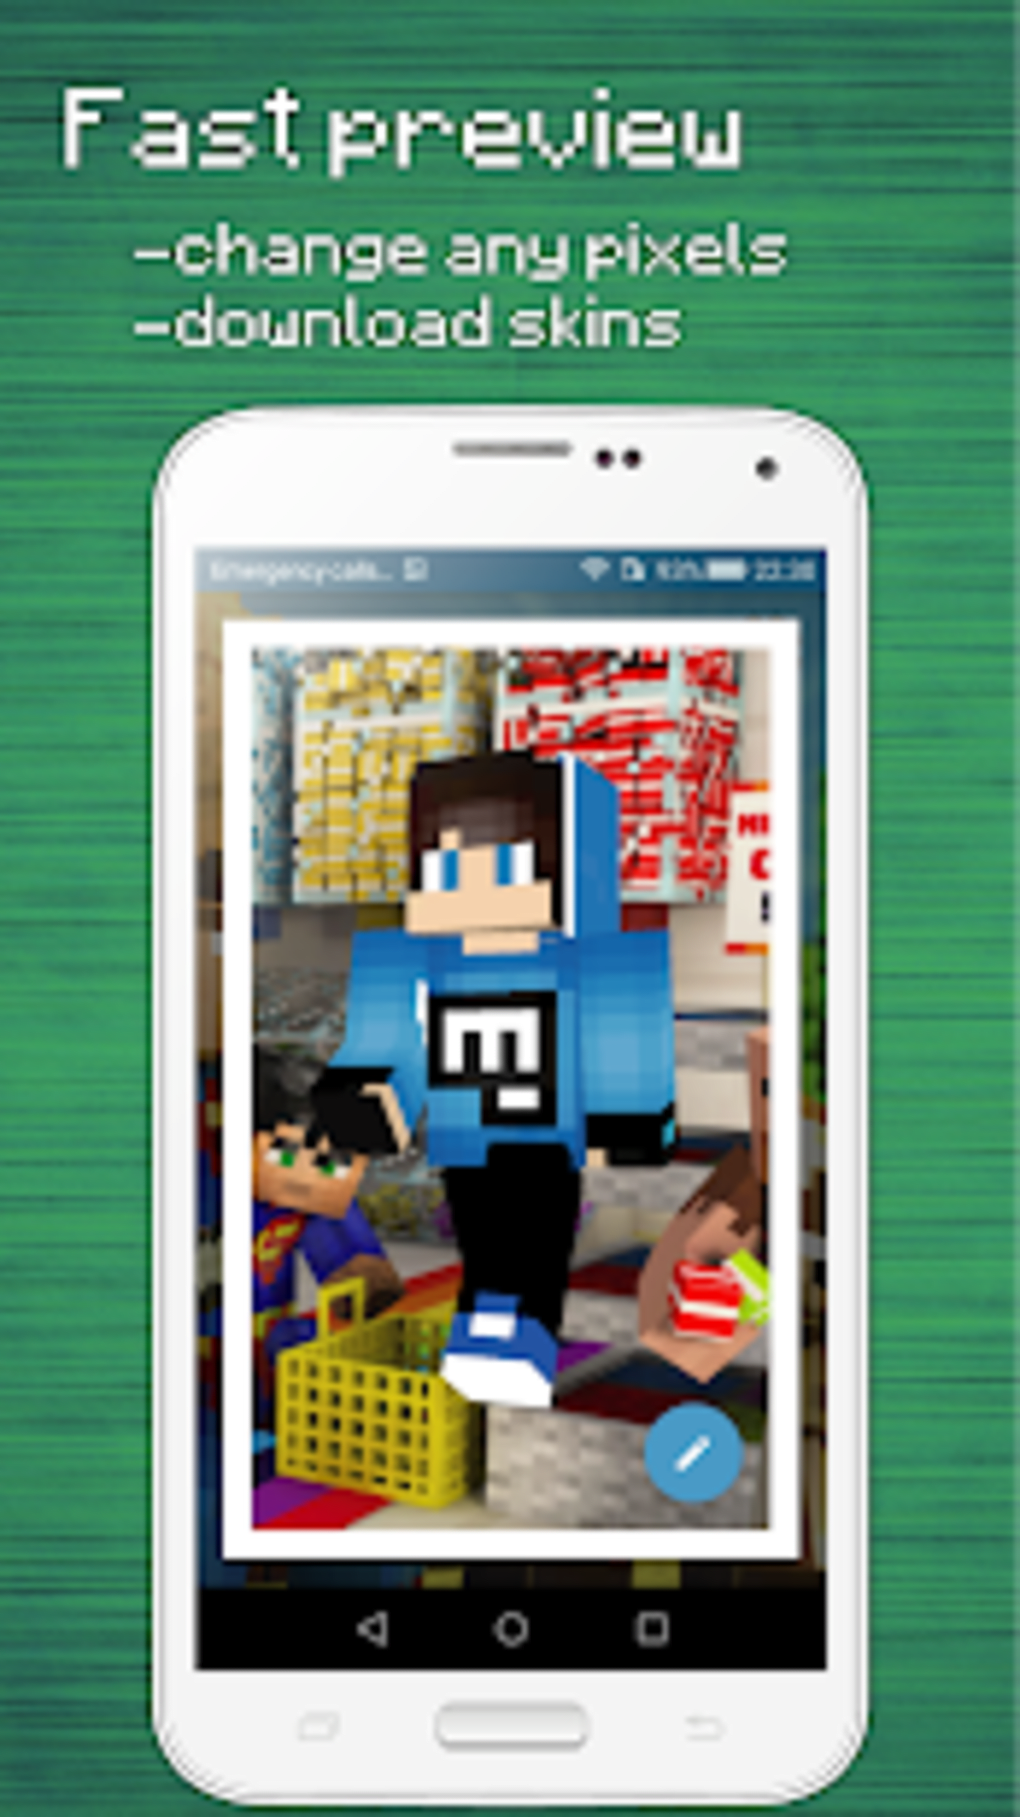 Skin Editor 3D for MC APK for Android - Download